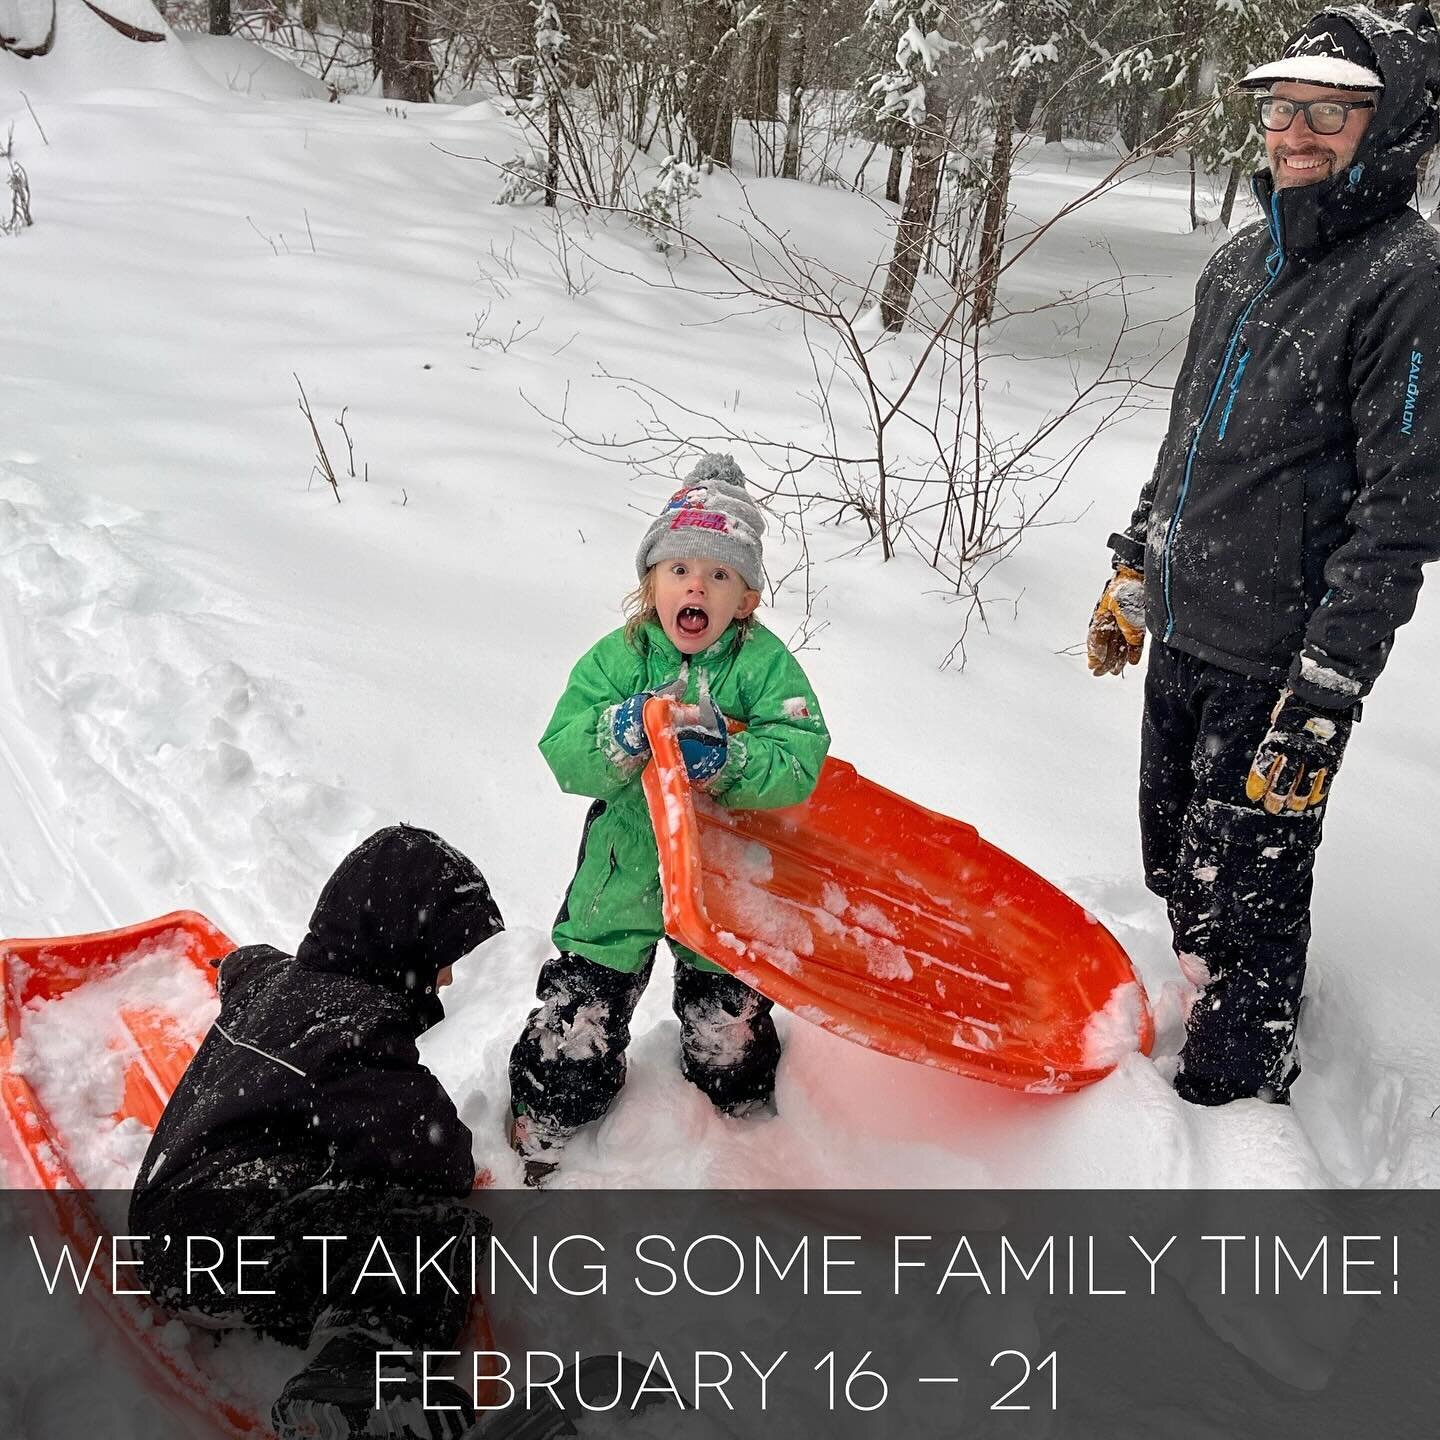 We&rsquo;re taking some family time! ❄️❄️⁣
⁣
We&rsquo;ll be out 2/16 - 2/21 and all orders placed during that time will ship when we return. ⁣
⁣
As a Thank You for your patience, take 10% off your order with code FAMILYTIME 😊⁣
⁣
🙏🙏🙏⁣
⁣
⁣
#familyb